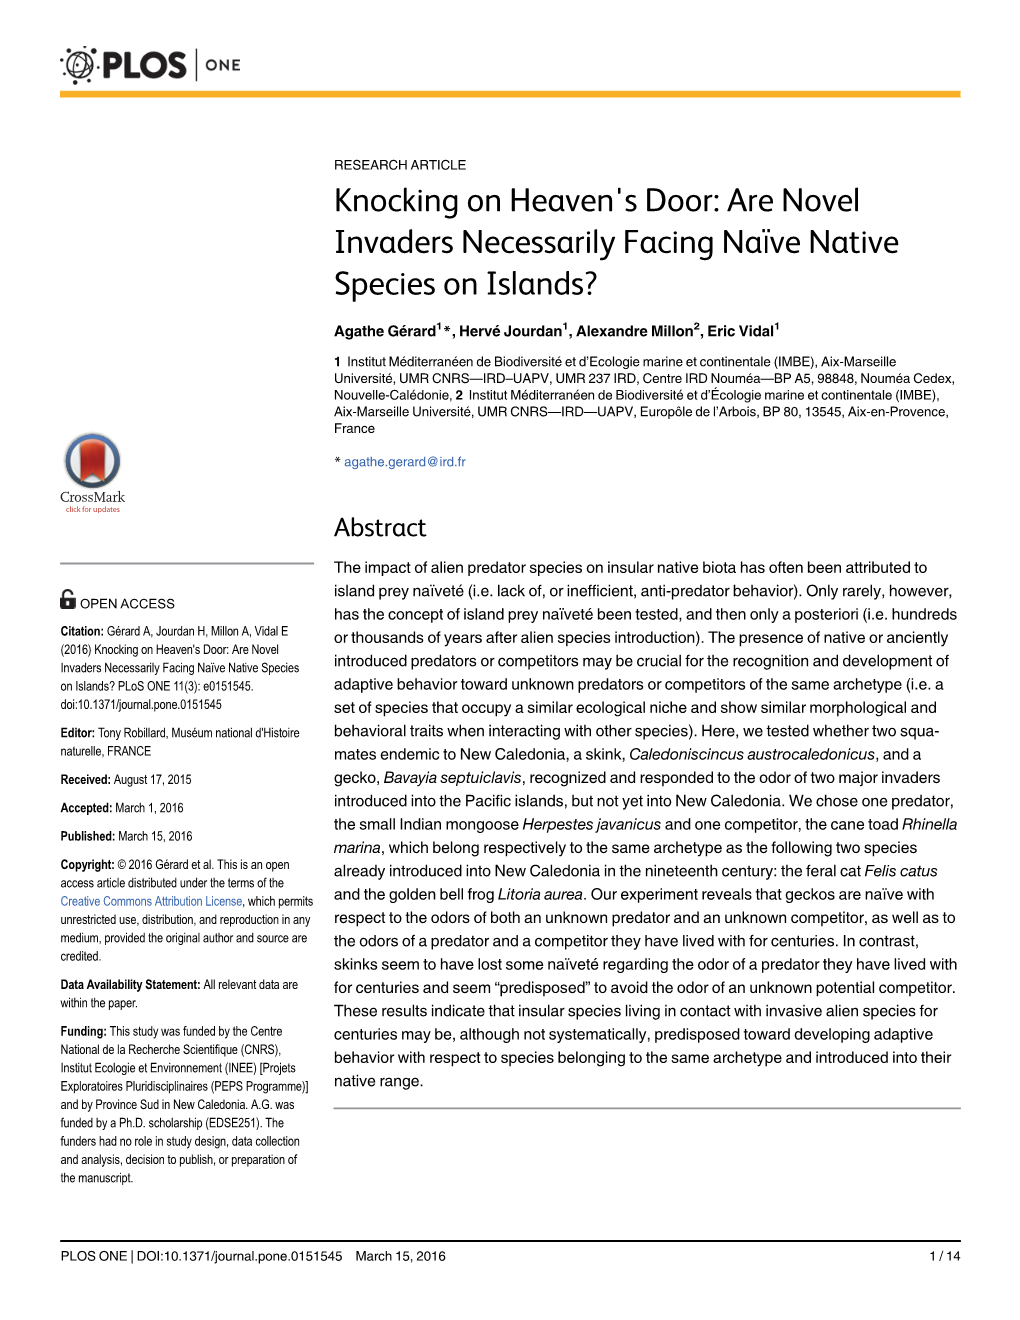 Knocking on Heaven's Door : Are Novel Invaders Necessarily